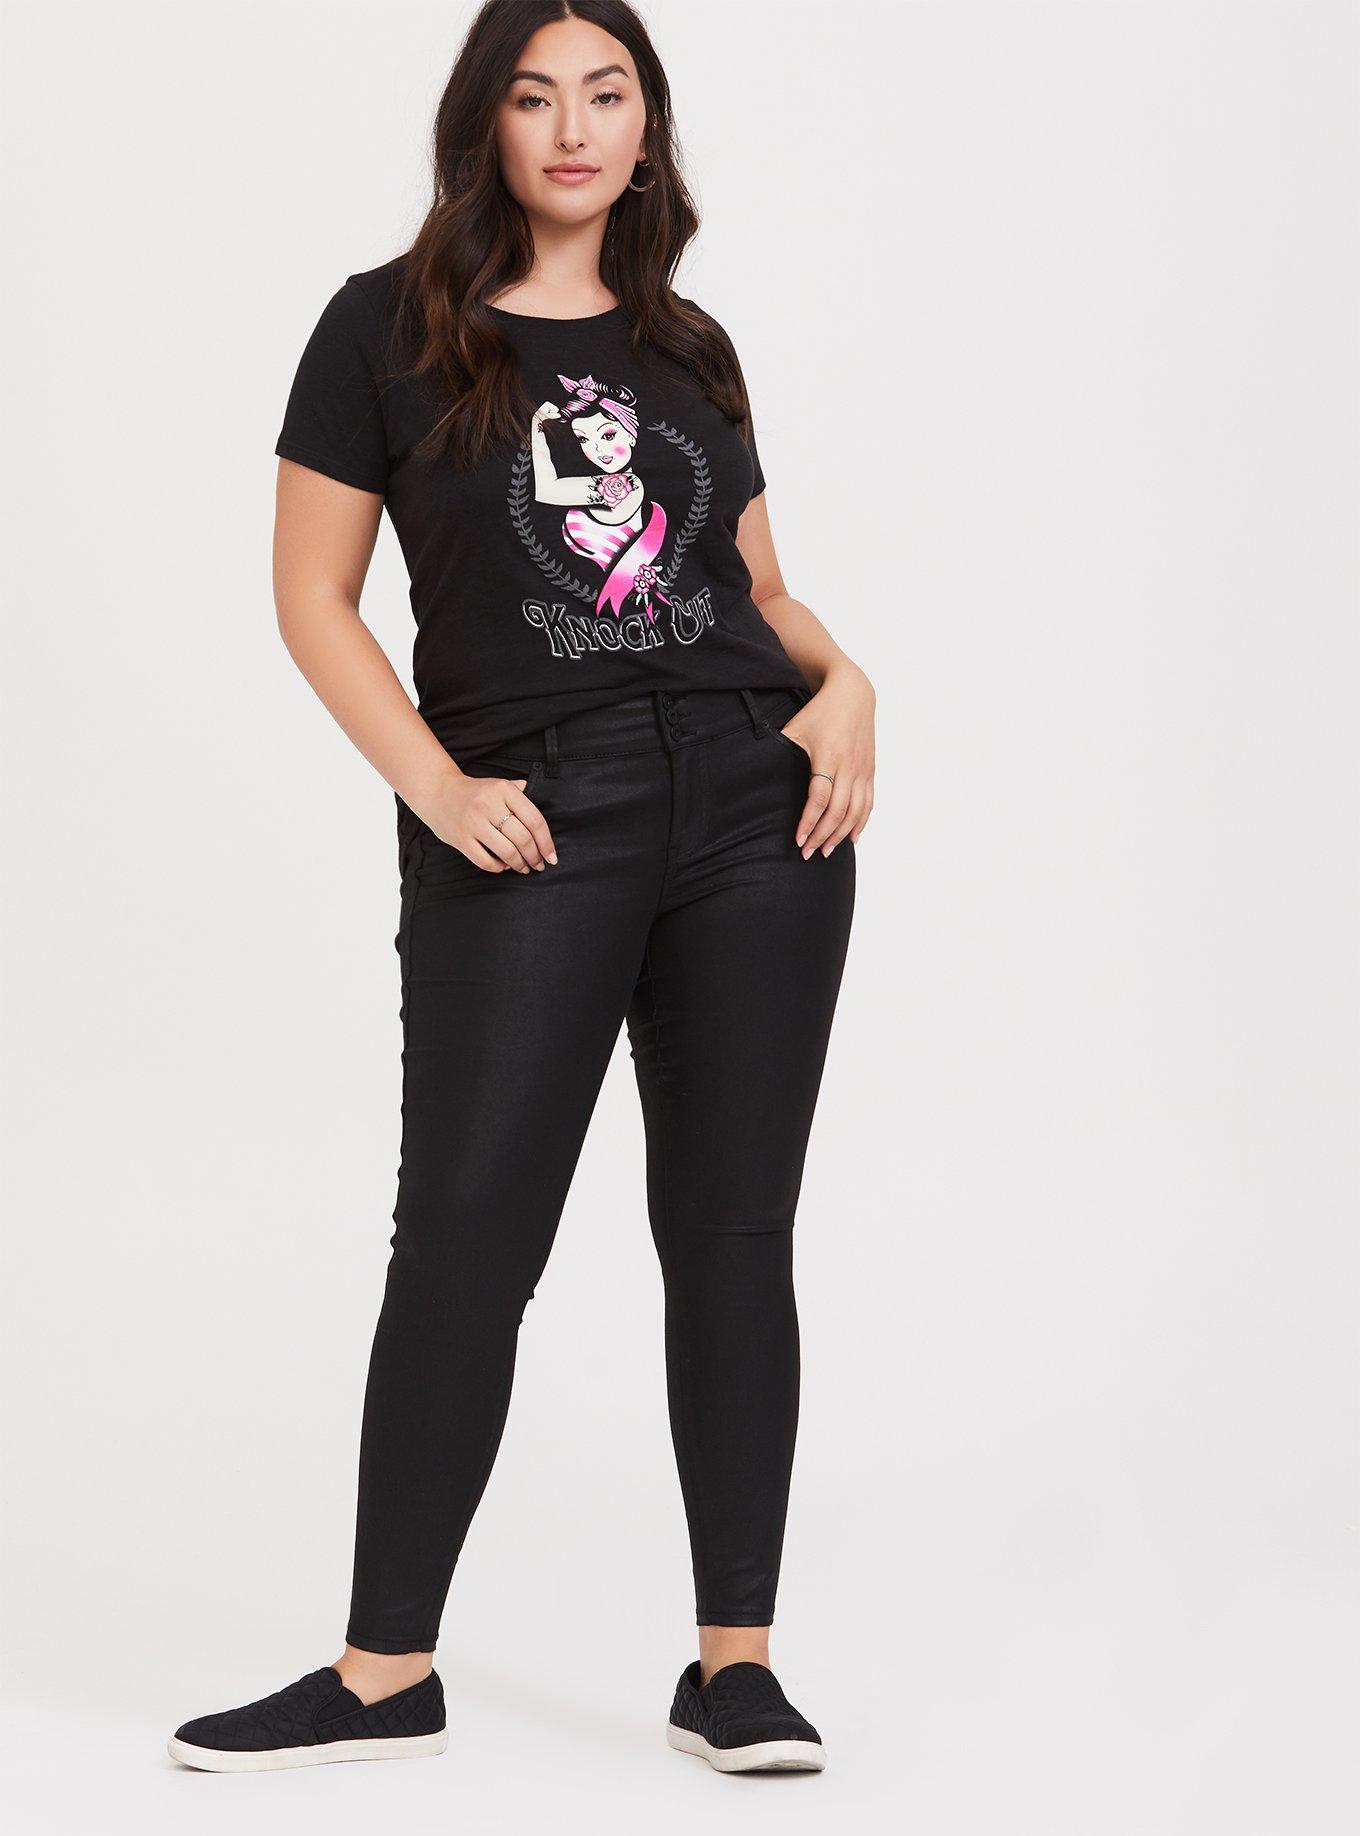 Plus Size - Breast Cancer Awareness - Knock Out Black Crew Tee - Torrid